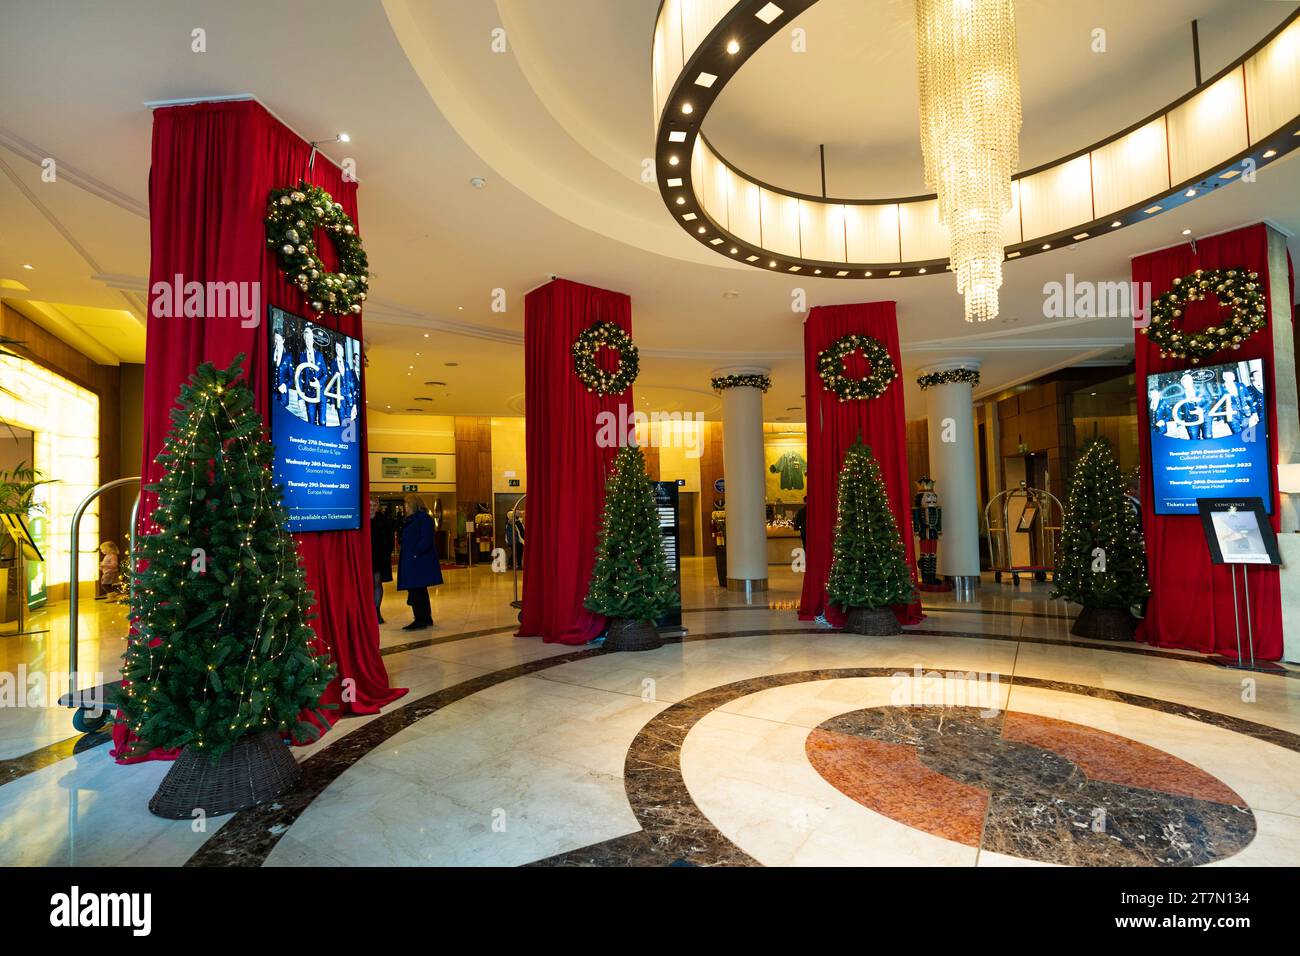 Belfast, Northern Ireland, UK - December 12, 2022: Lobby of Europa Hotel, the most bombed hotel in the world, with giant nutcracker and red drapes in Stock Photo